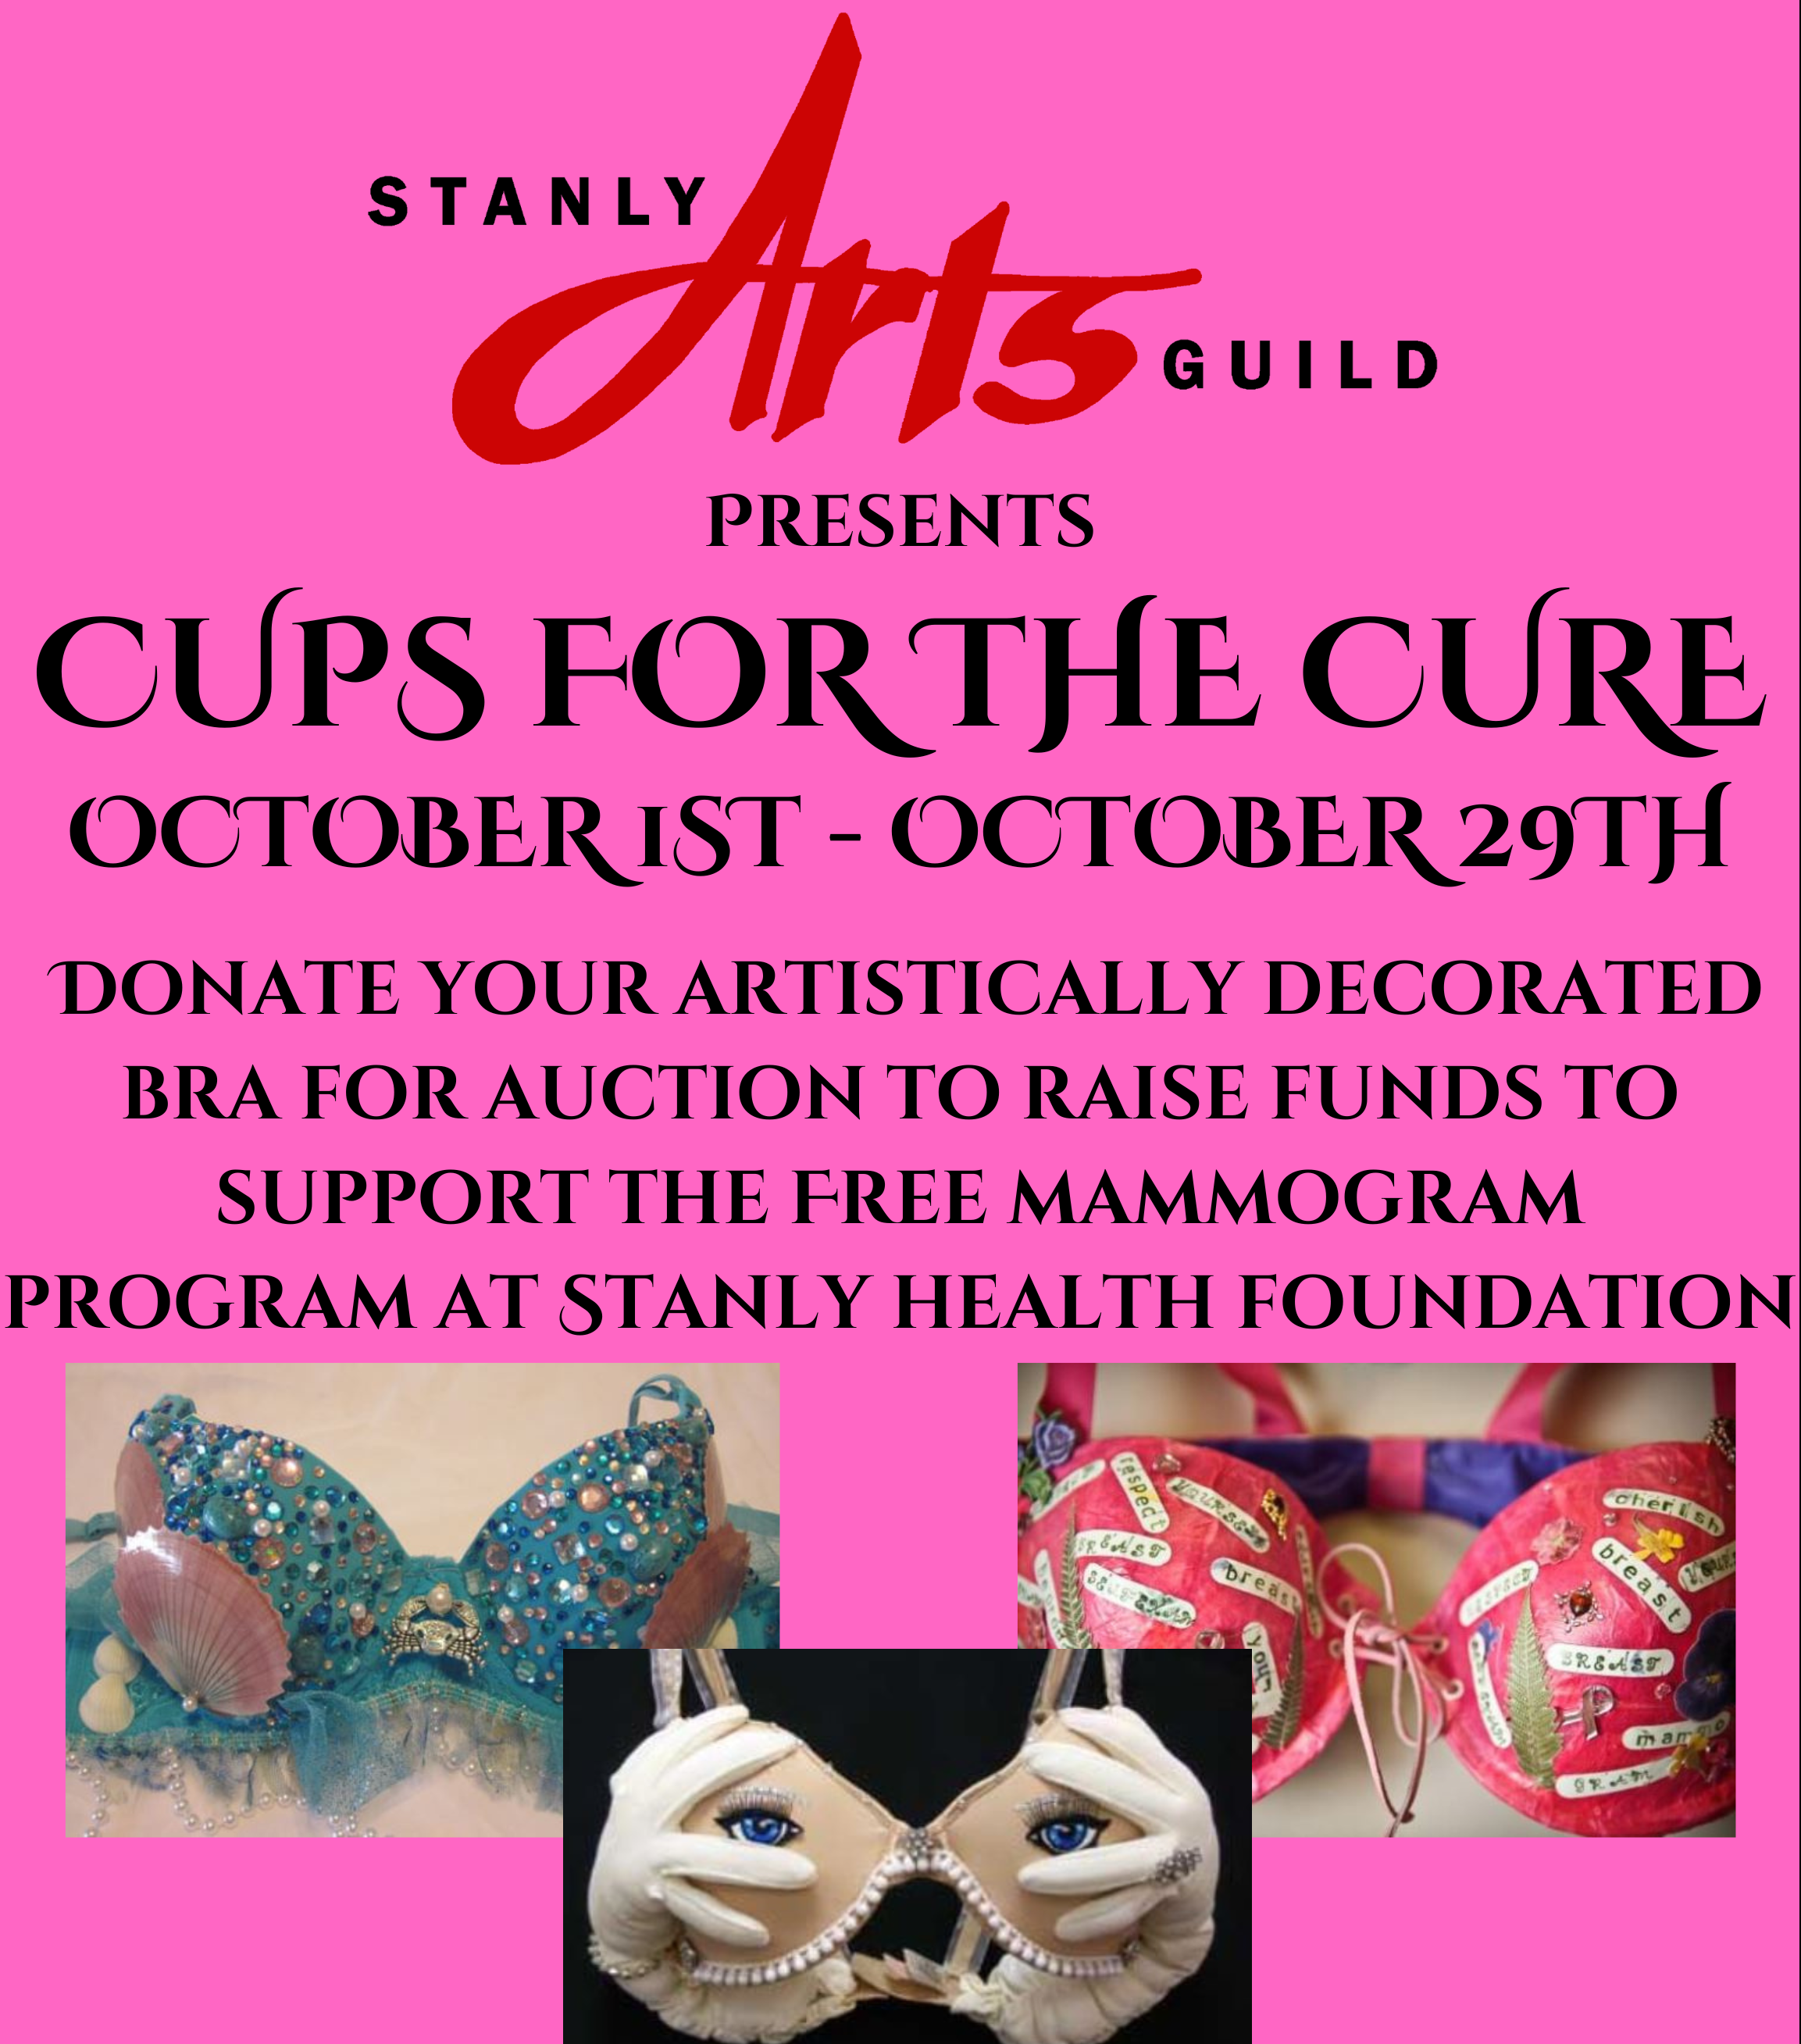 Cups for the Cure